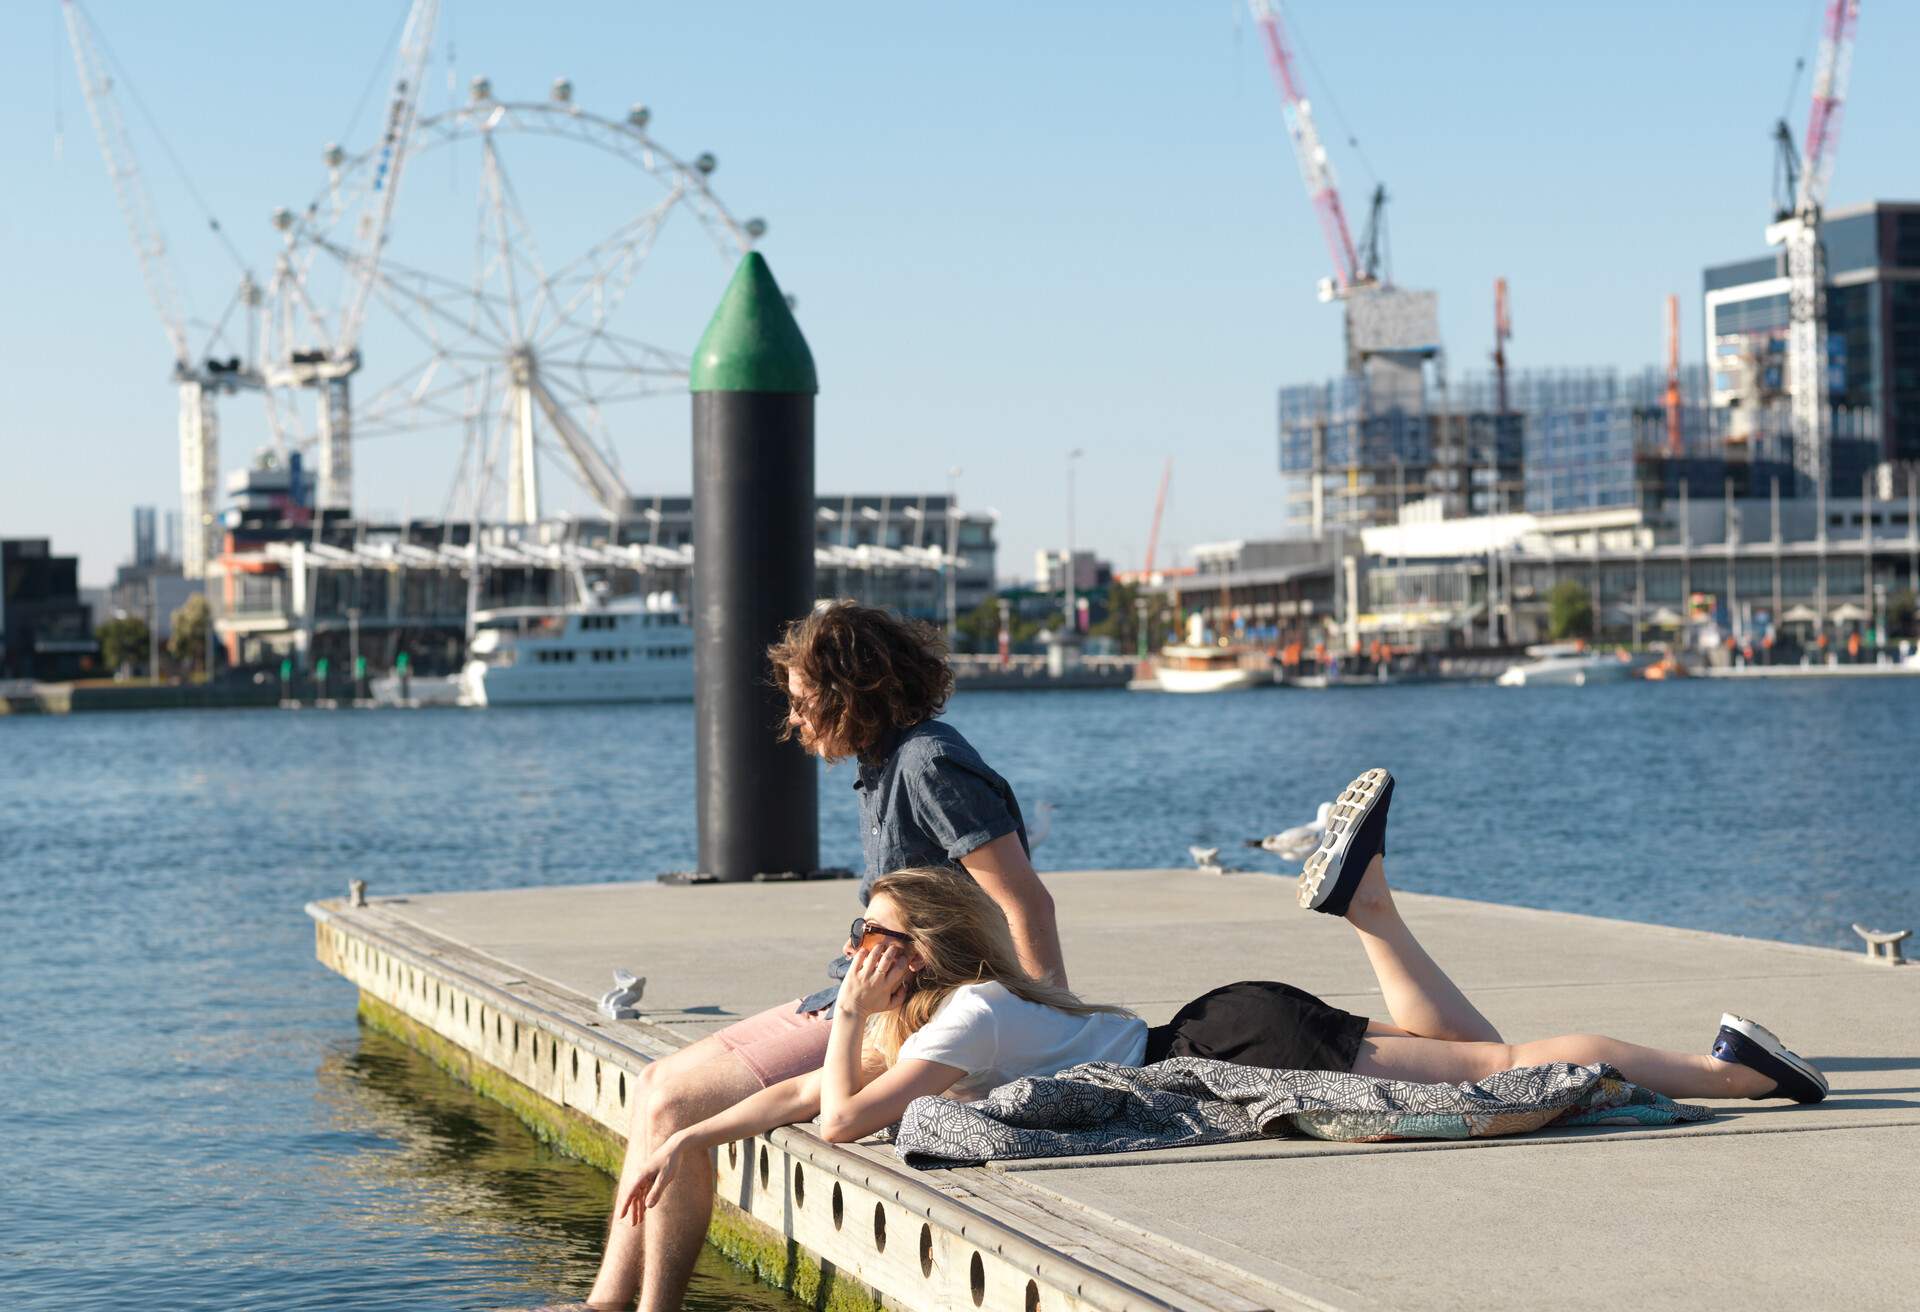 Two friends relaxing on a pier with distant views of a Ferris wheel and construction cranes beside a port.